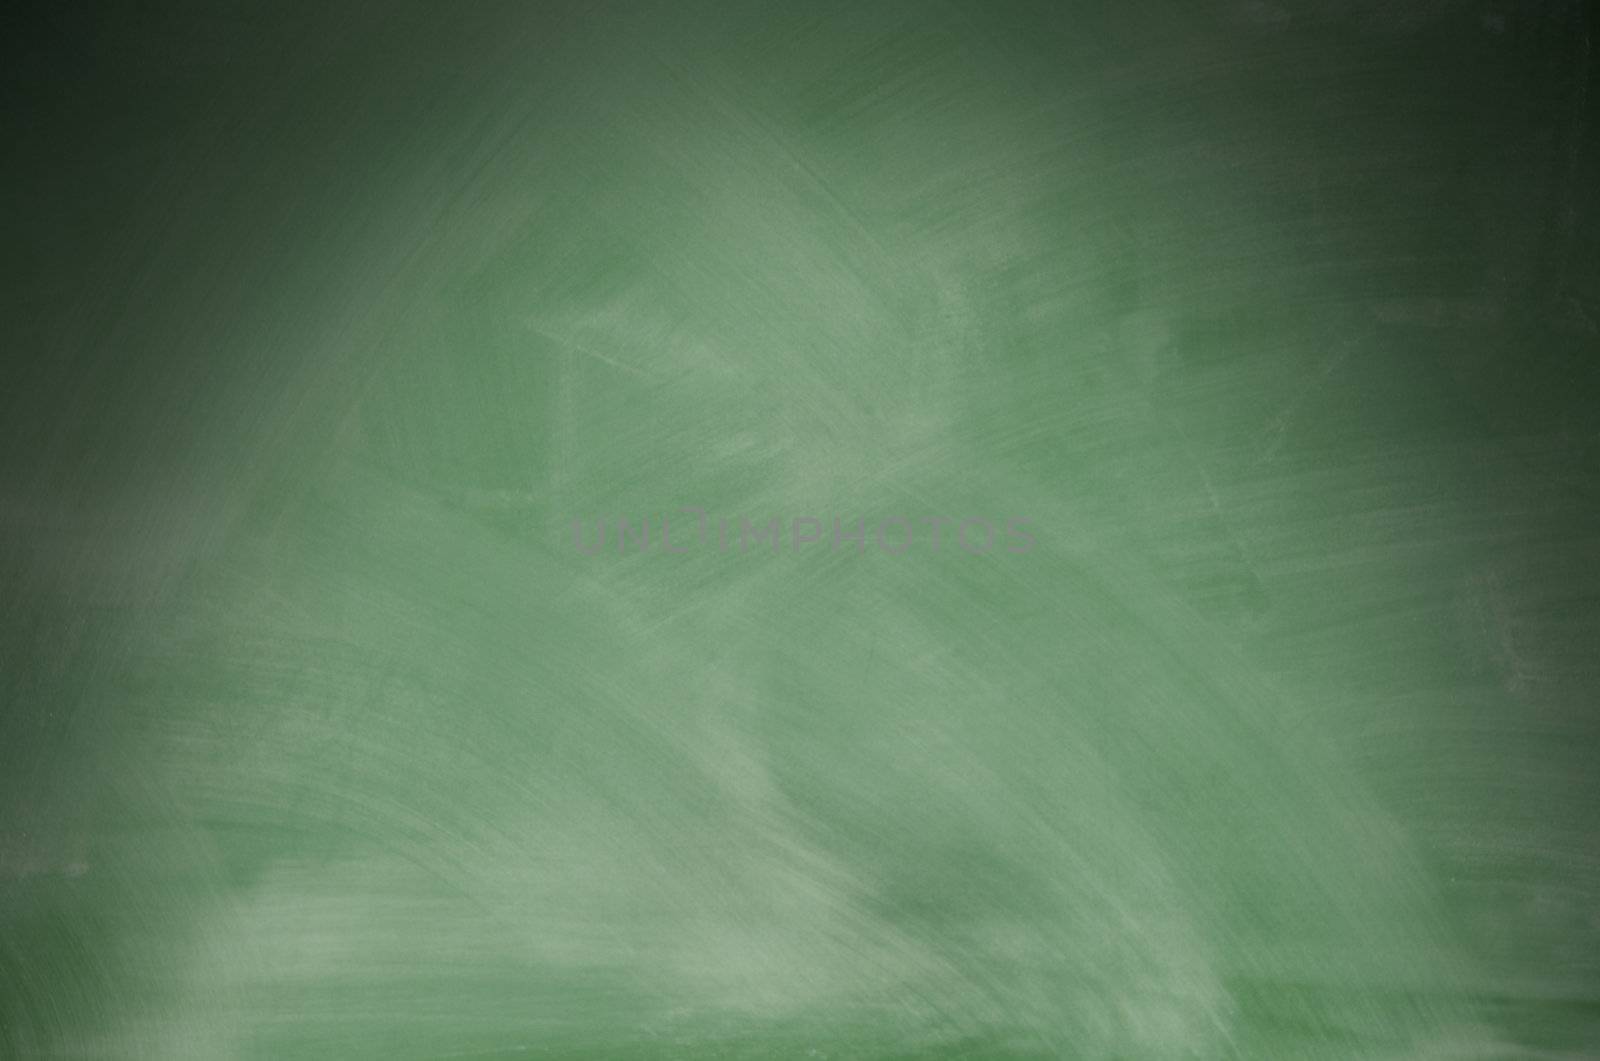 Green chalkboard with eraser marks lit dramatically from above